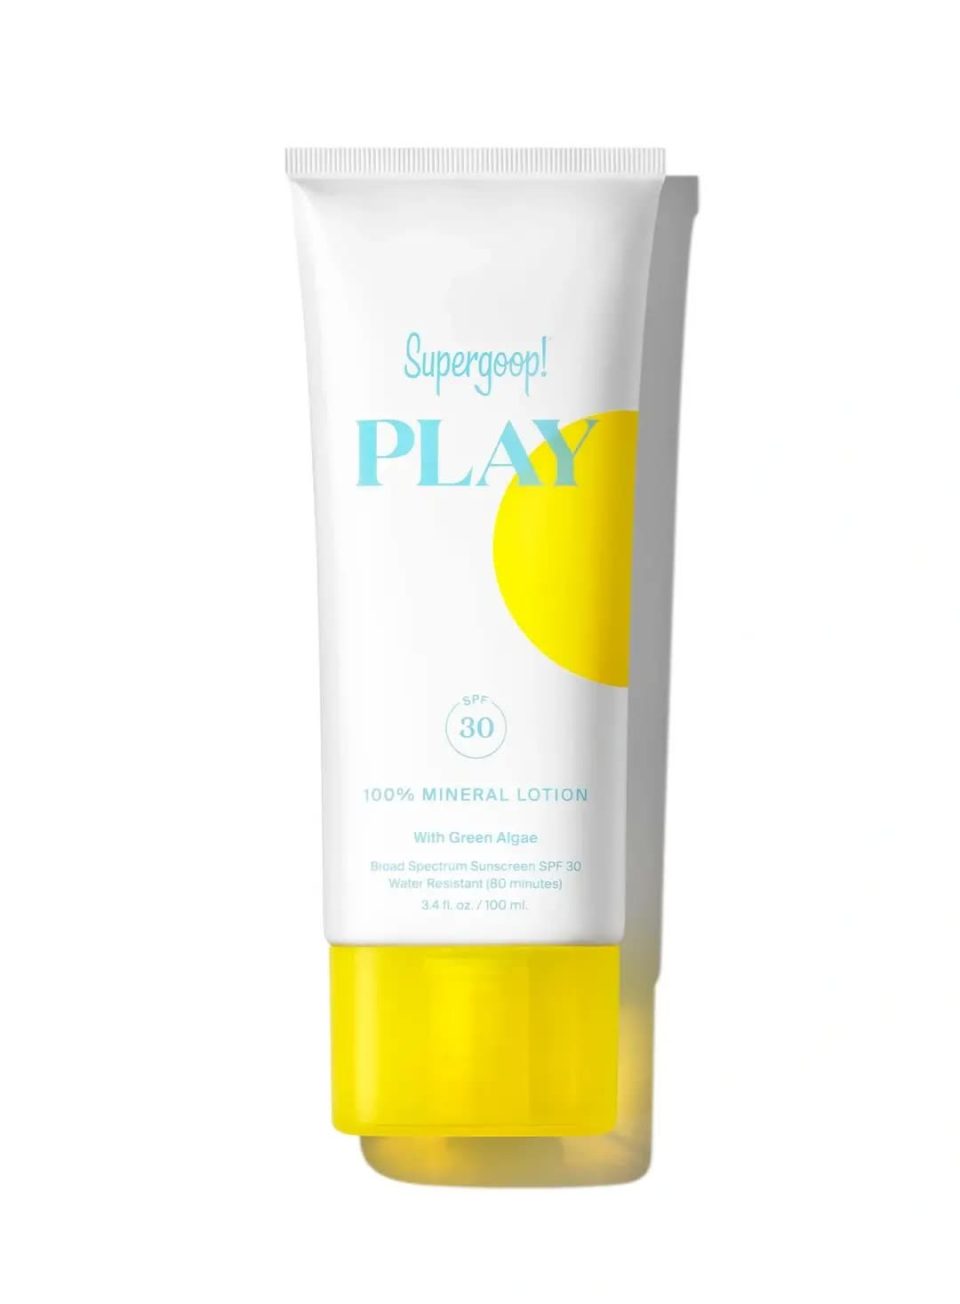 supergoop-play_100__mineral_lotion_spf30_with_green_algae_3-4oz_packshot